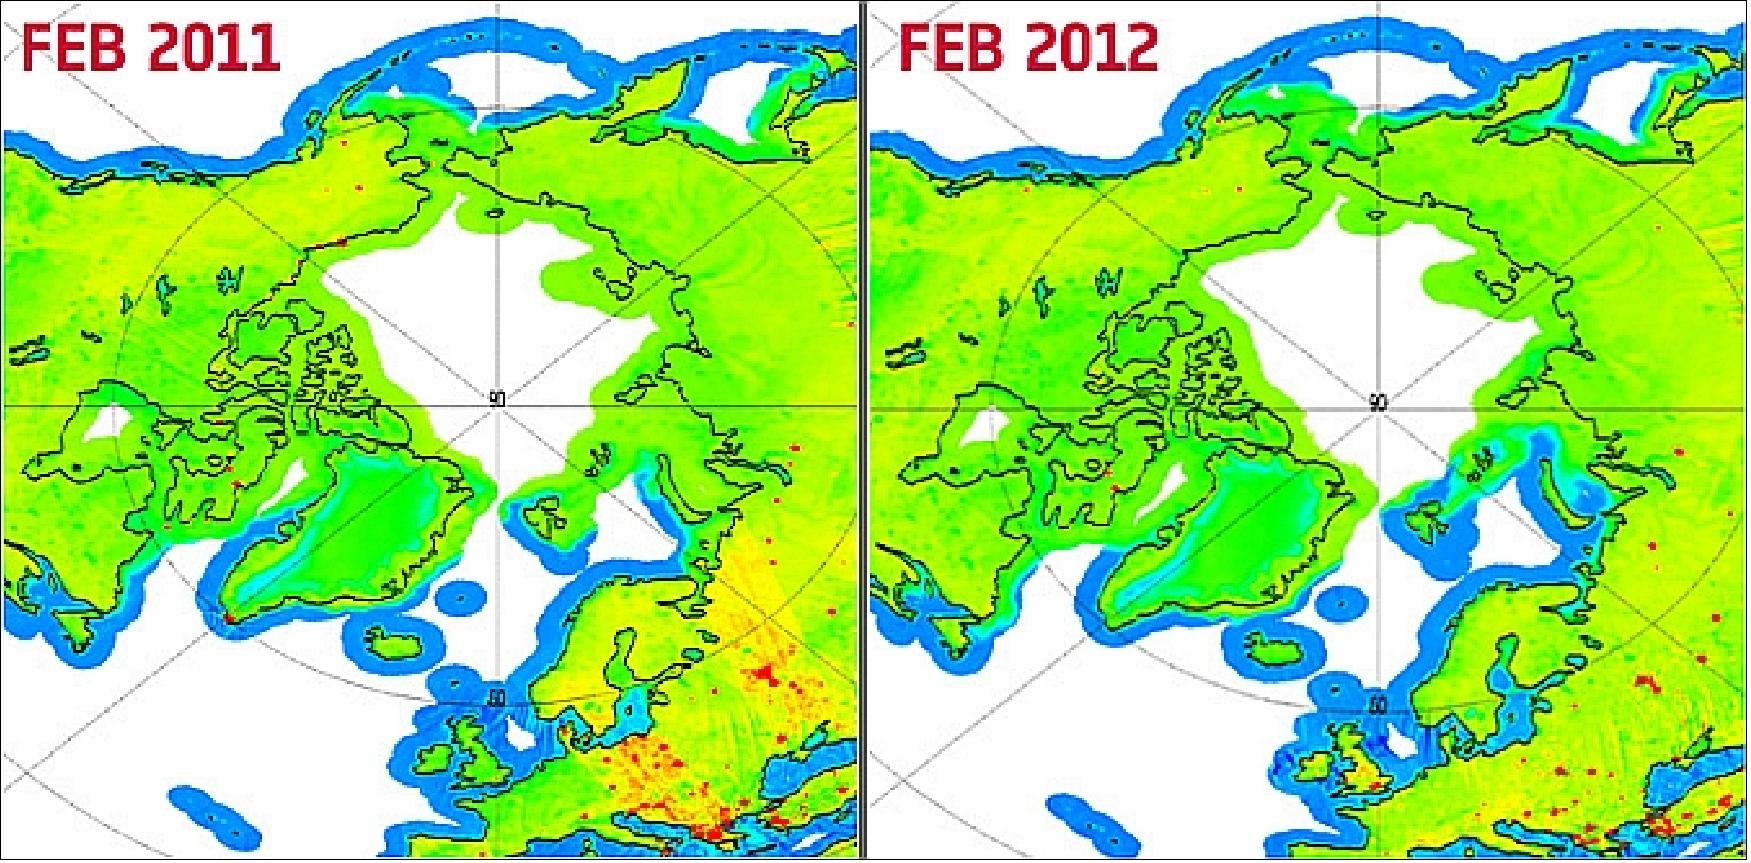 Figure 71: Illustration of RFI (Radio Frequency Interference) in the northern latitudes in 2011 and 2012 (image credit: ESA, Ref. 91)